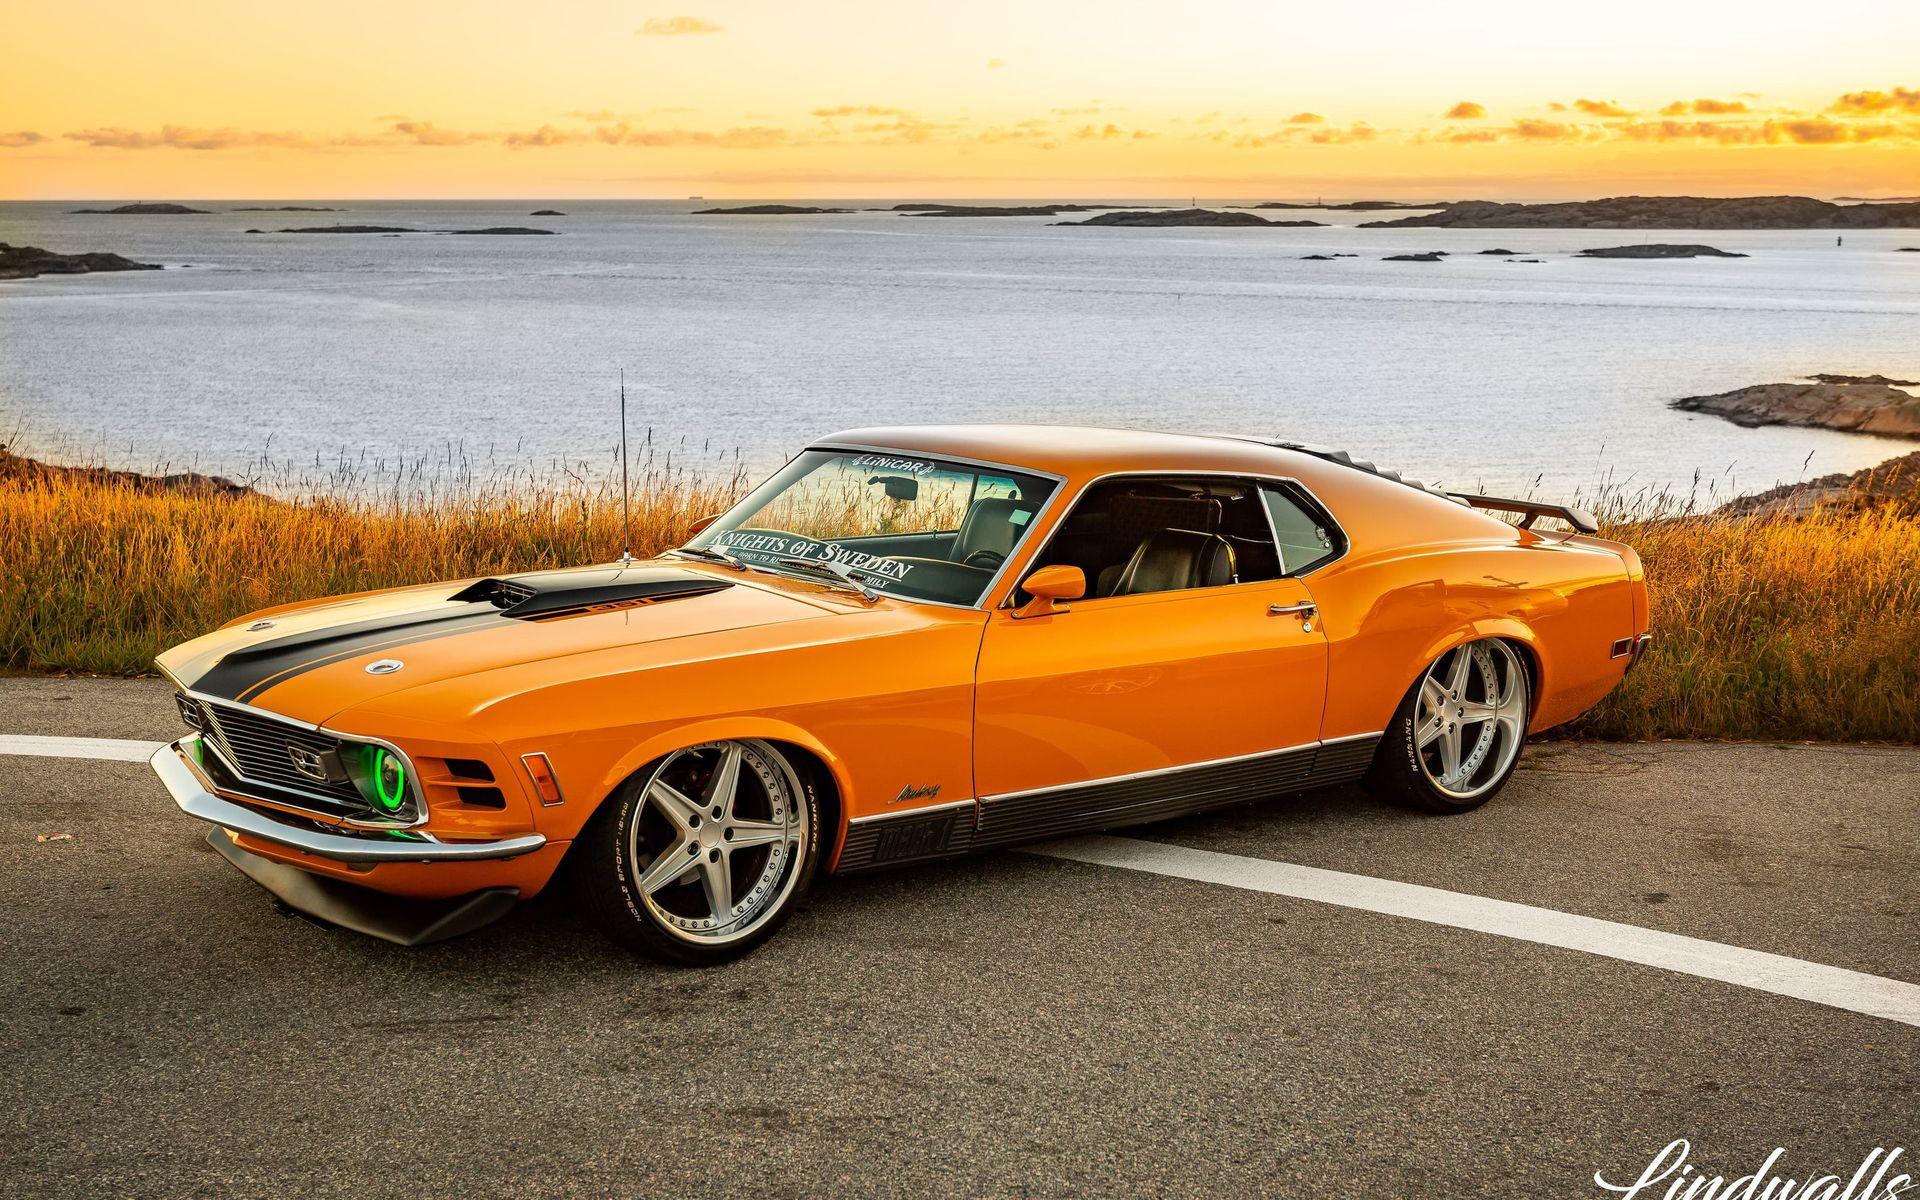 6. Ford Mustang Mach 1 1970